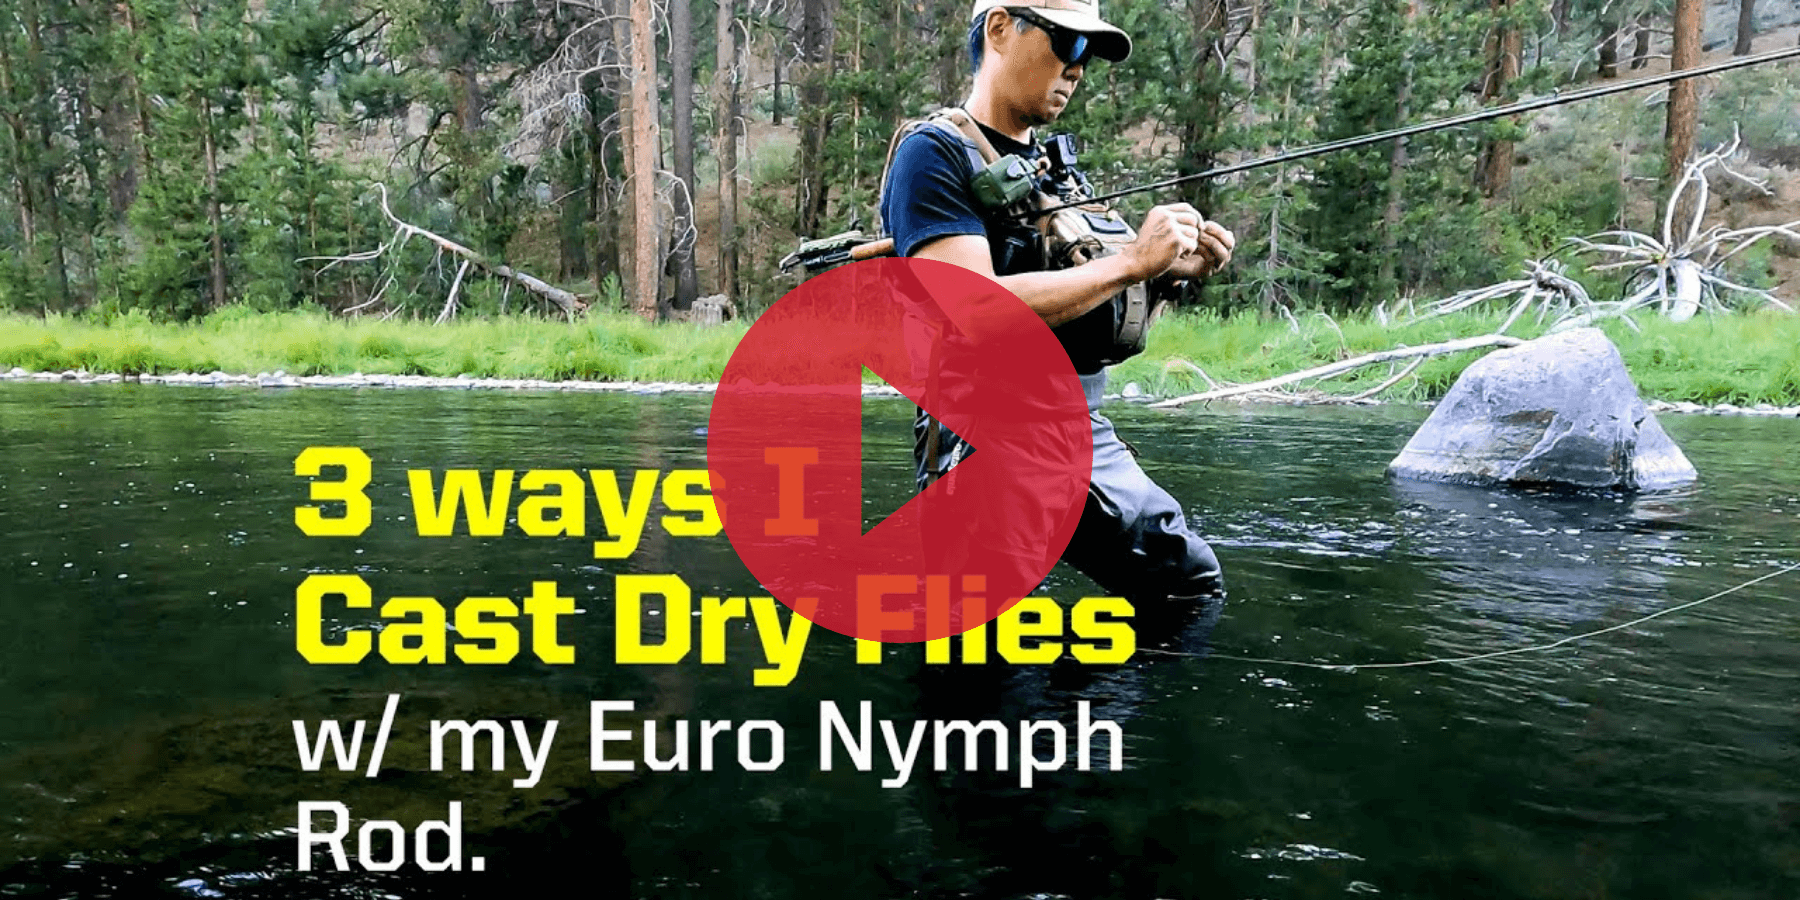 In this video Jeff shows his top 3 techniques for casting dry flies with his Euro nymph rig